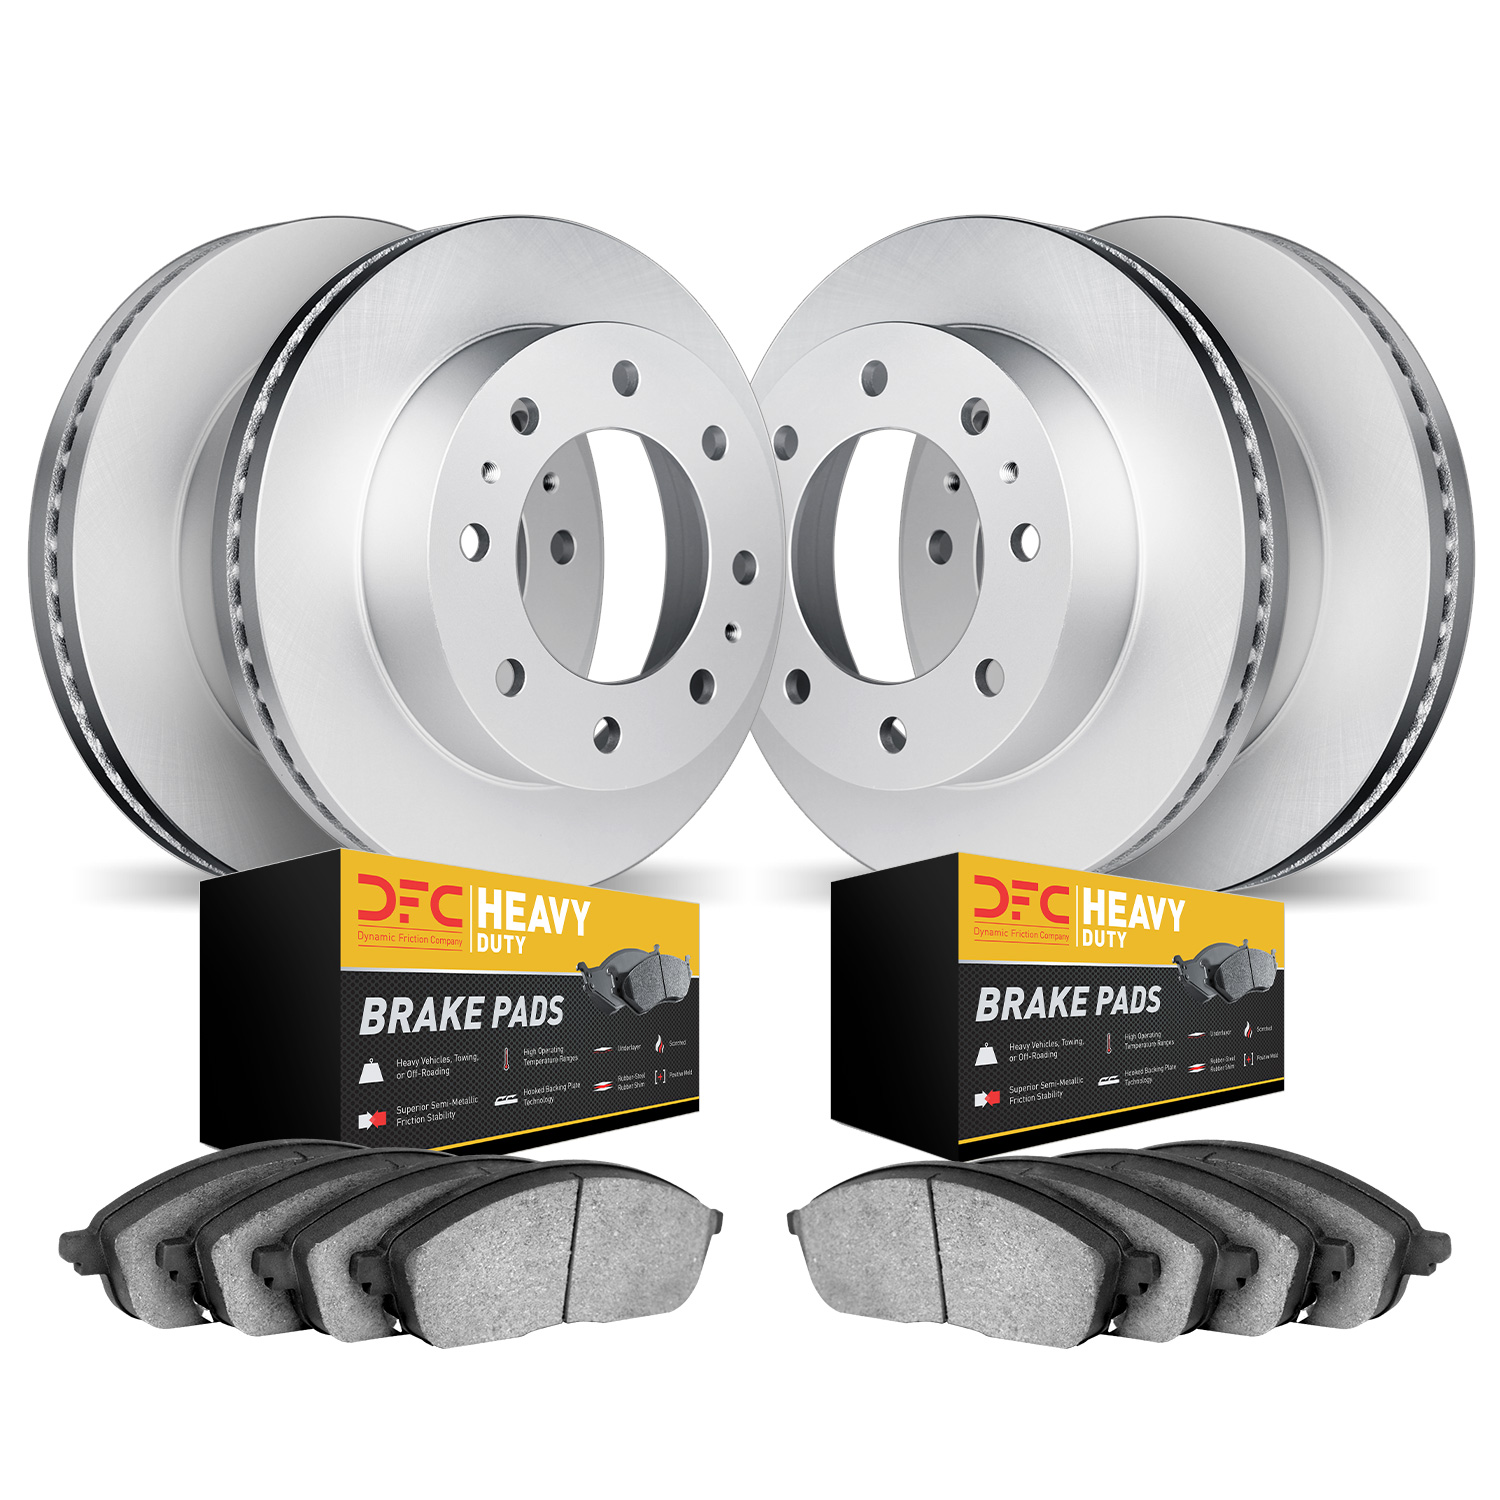 4204-54091 Geospec Brake Rotors w/Heavy-Duty Brake Pads Kit, Fits Select Ford/Lincoln/Mercury/Mazda, Position: Front and Rear